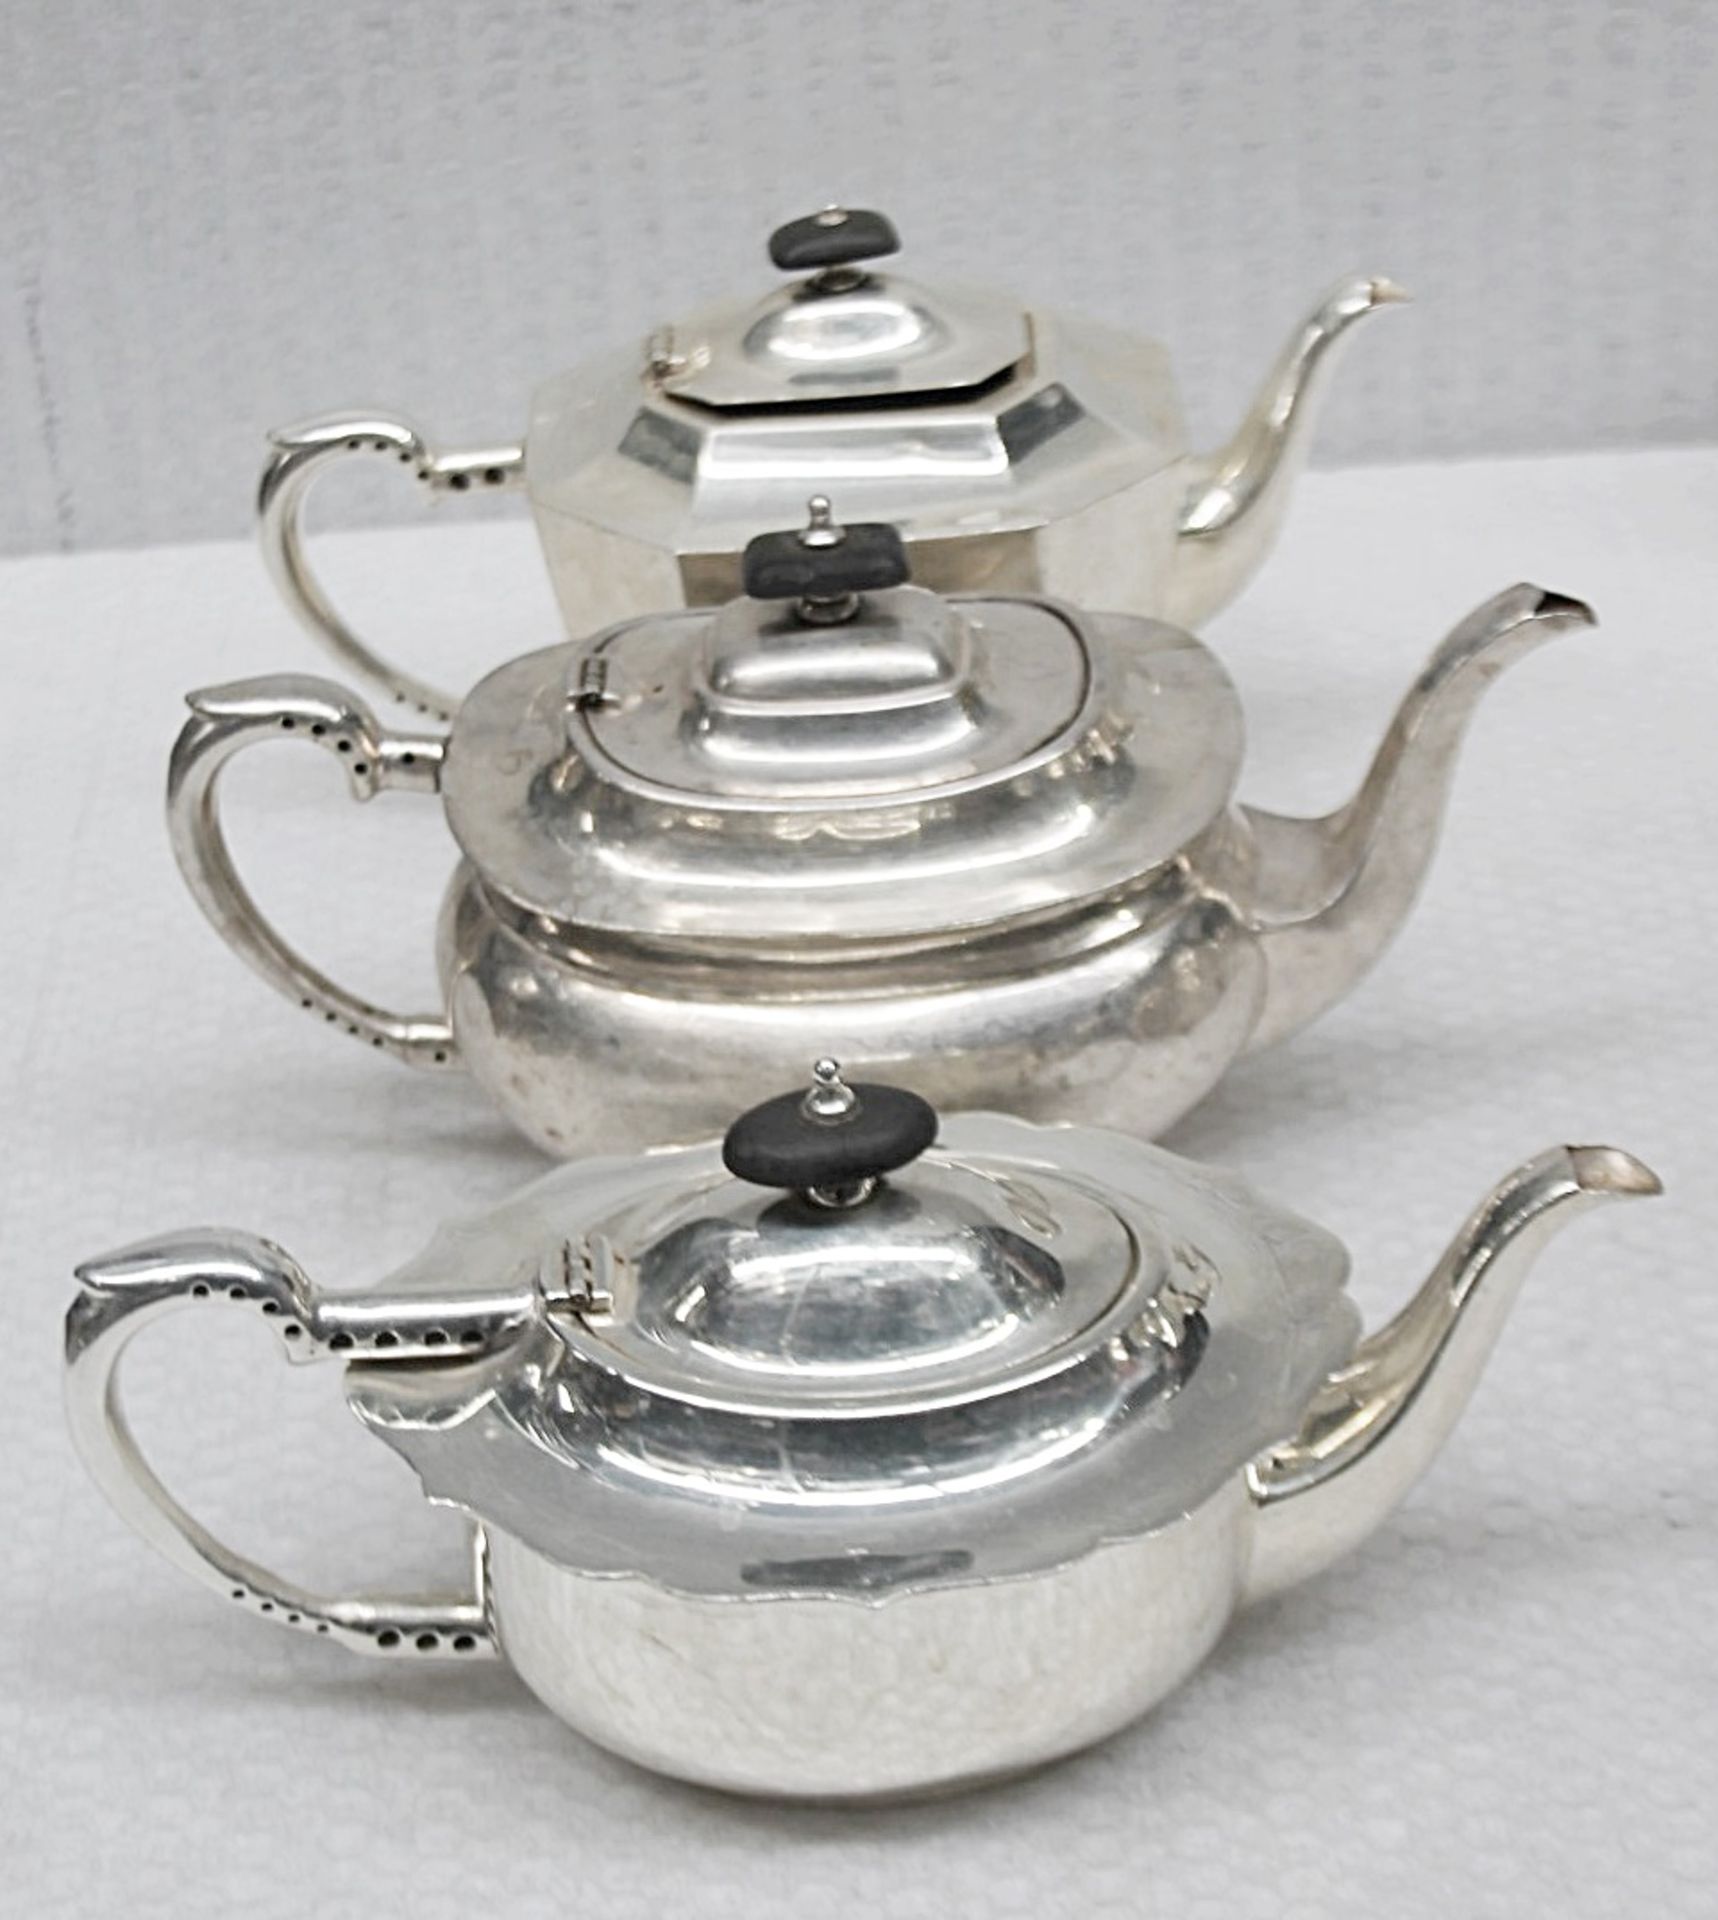 10 x Assorted Vintage Silver-Plated Teapots - Recently Removed From A Well-known London Department - Image 2 of 5